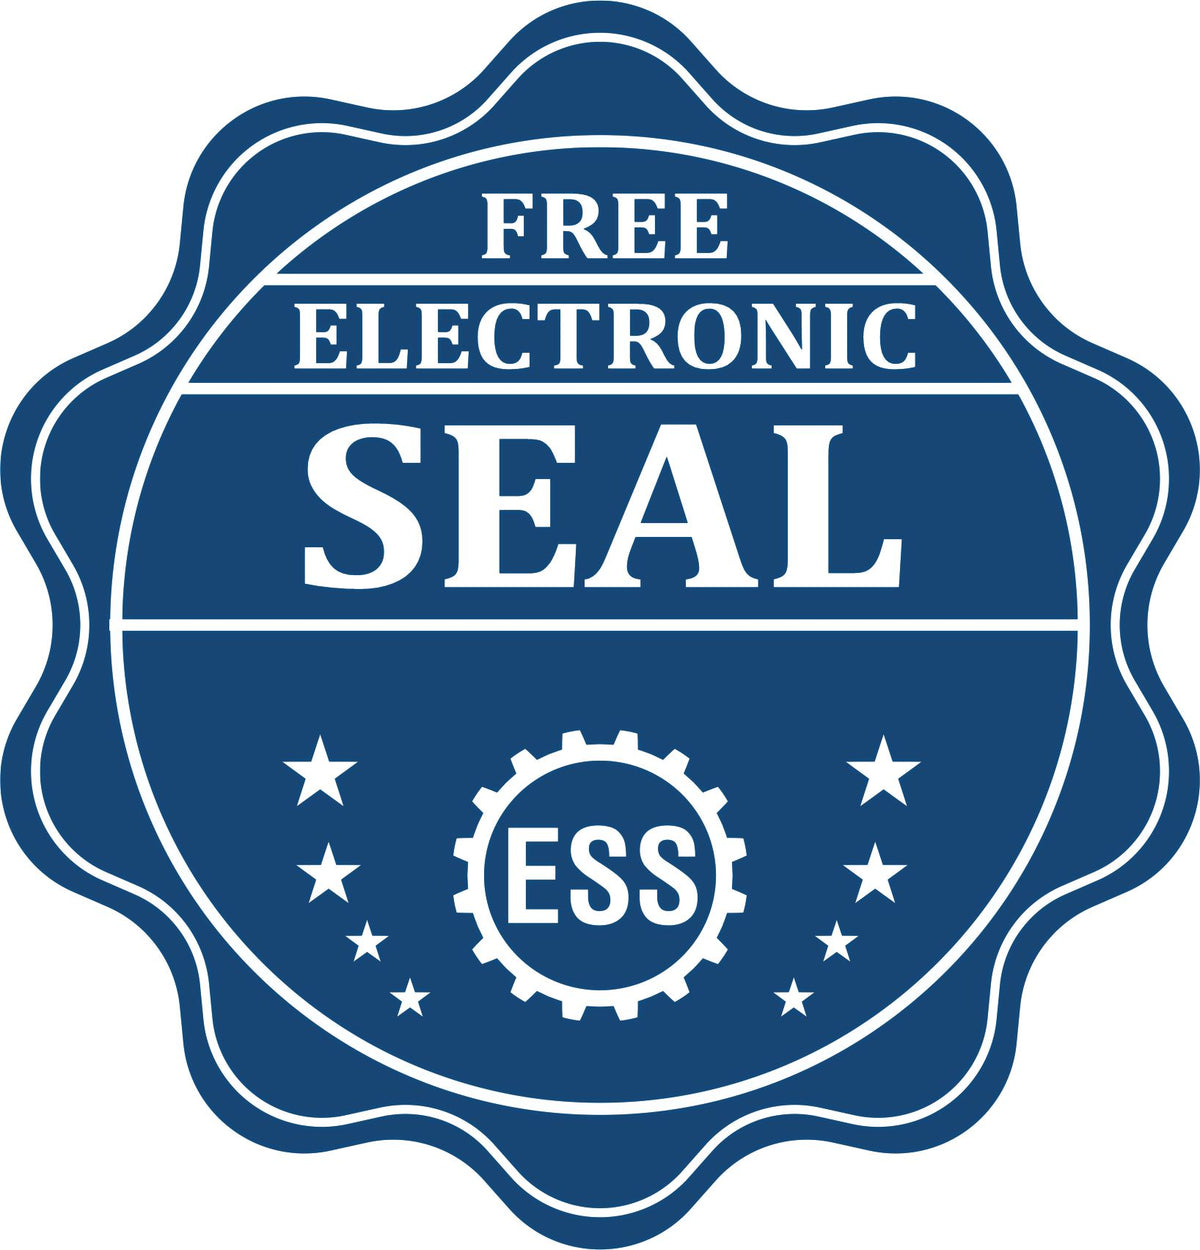 A badge showing a free electronic seal for the Arkansas Geologist Desk Seal with stars and the ESS gear on the emblem.